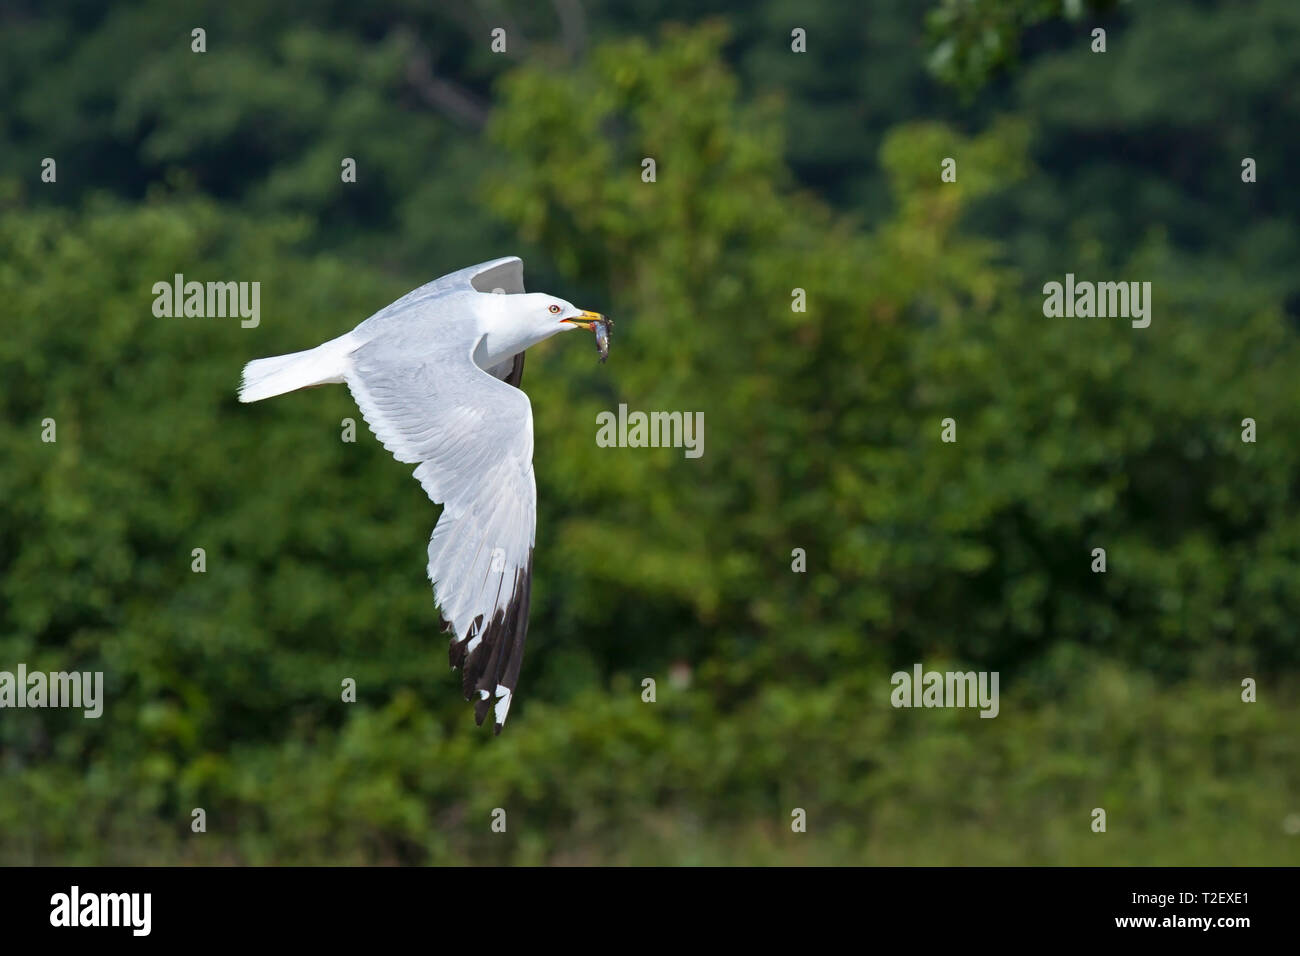 A ring-billed gull flies holding a fish in its beak. Flapping its white and gray feathers, it circles the green trees looking for a place to dine. Stock Photo